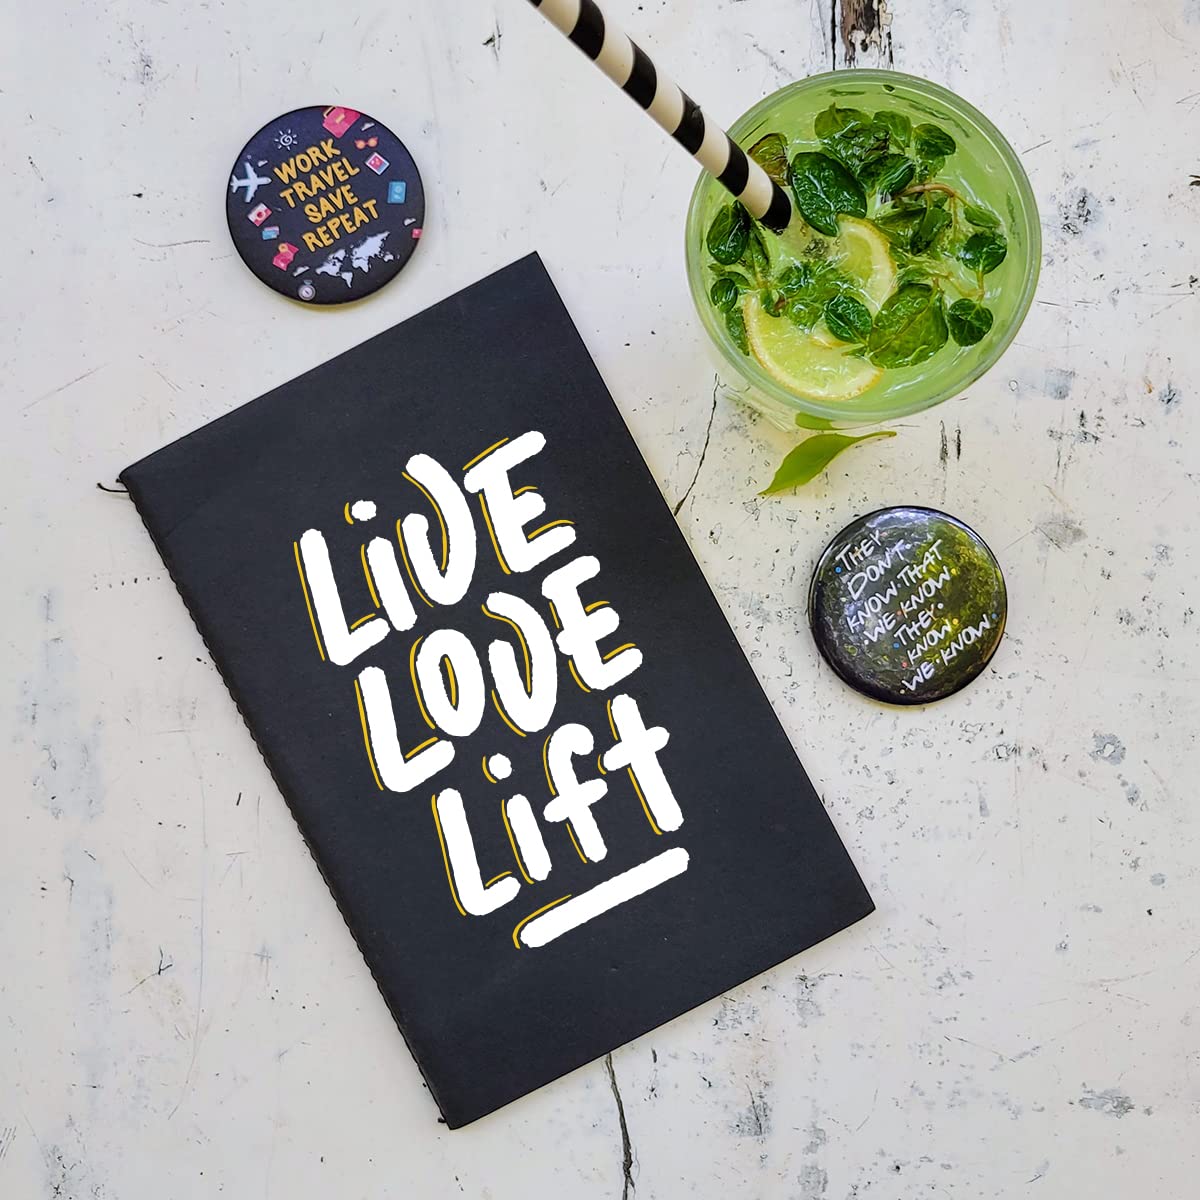 Live Love Lift - Black A5 Doodle Notebook - Kraft Cover Notebook - A5 - 300 GSM Kraft Cover - Handmade - Unruled - 80 Pages - Natural Shade Pages 120 GSM - Funny Quotes & Quirky, Funky designs